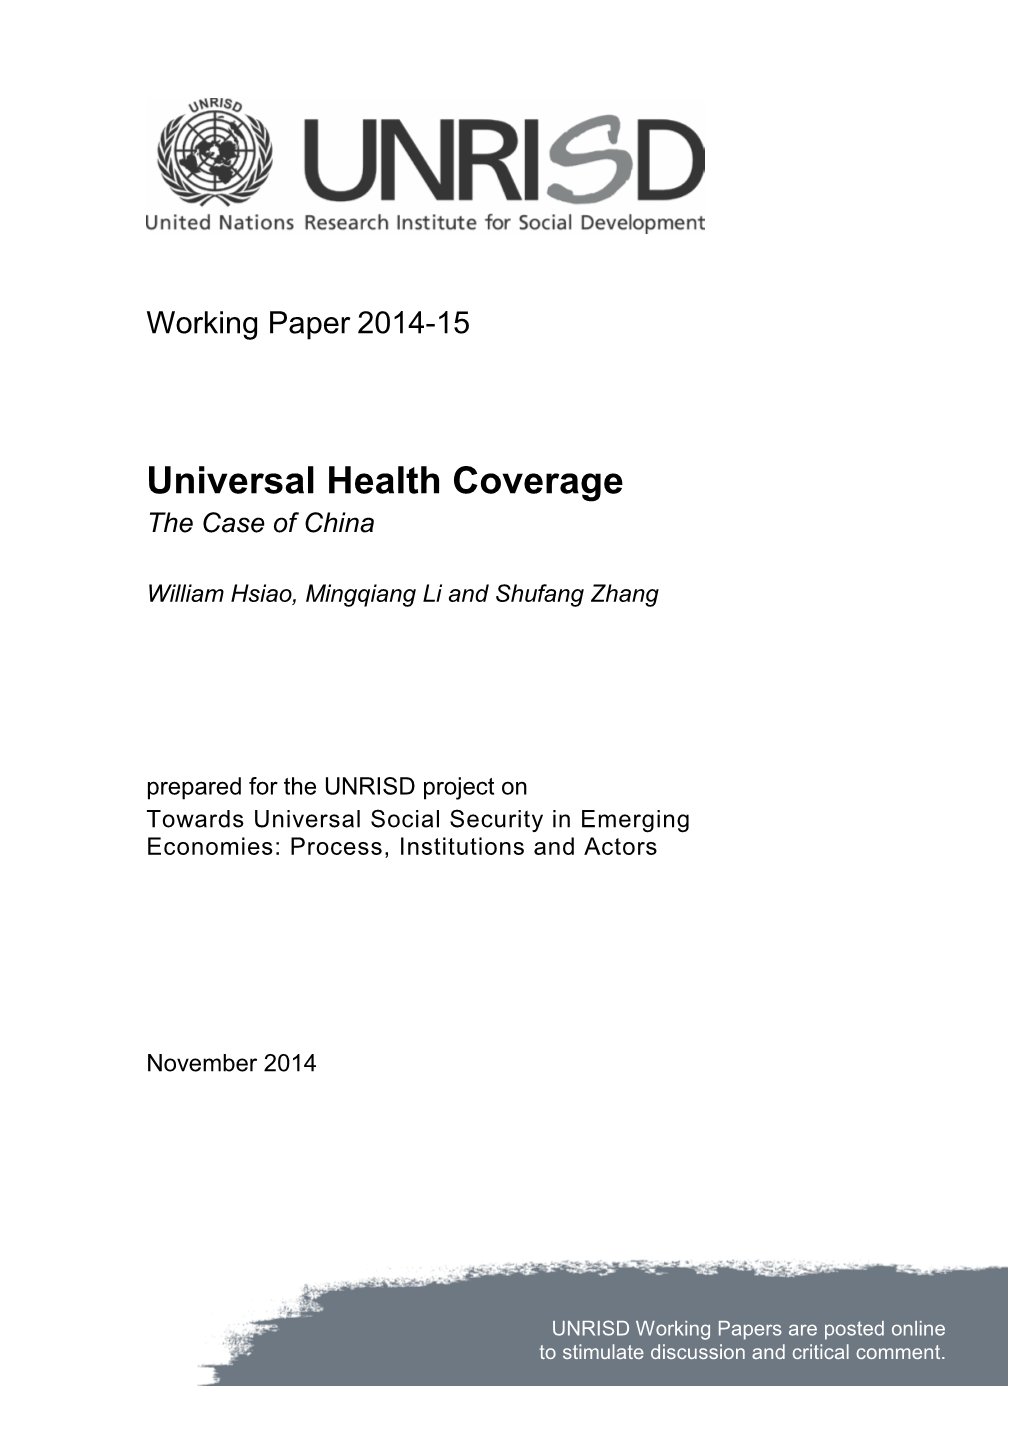 Universal Health Coverage: the Case of China William Hsiao, Mingqiang Li and Shufang Zhang